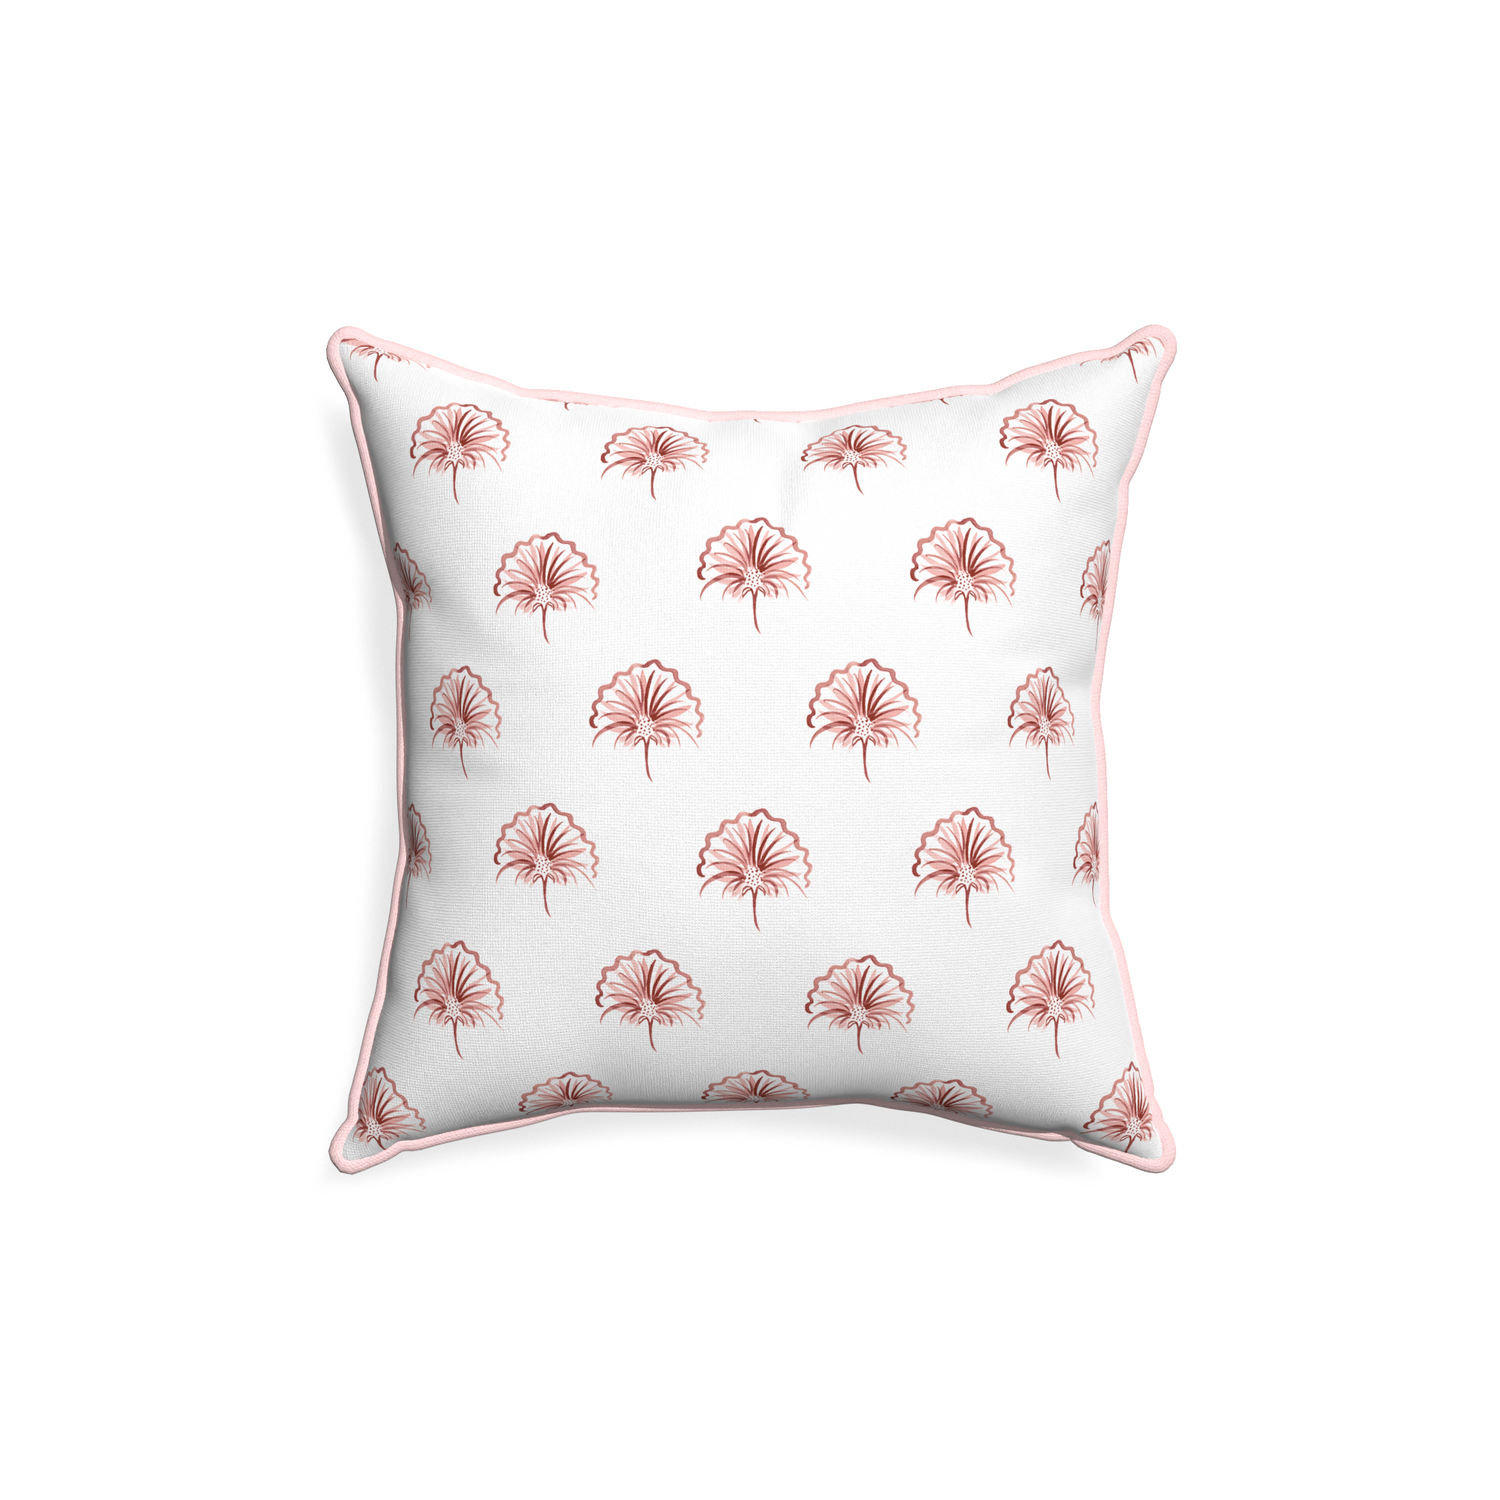 18-square penelope rose custom floral pinkpillow with petal piping on white background